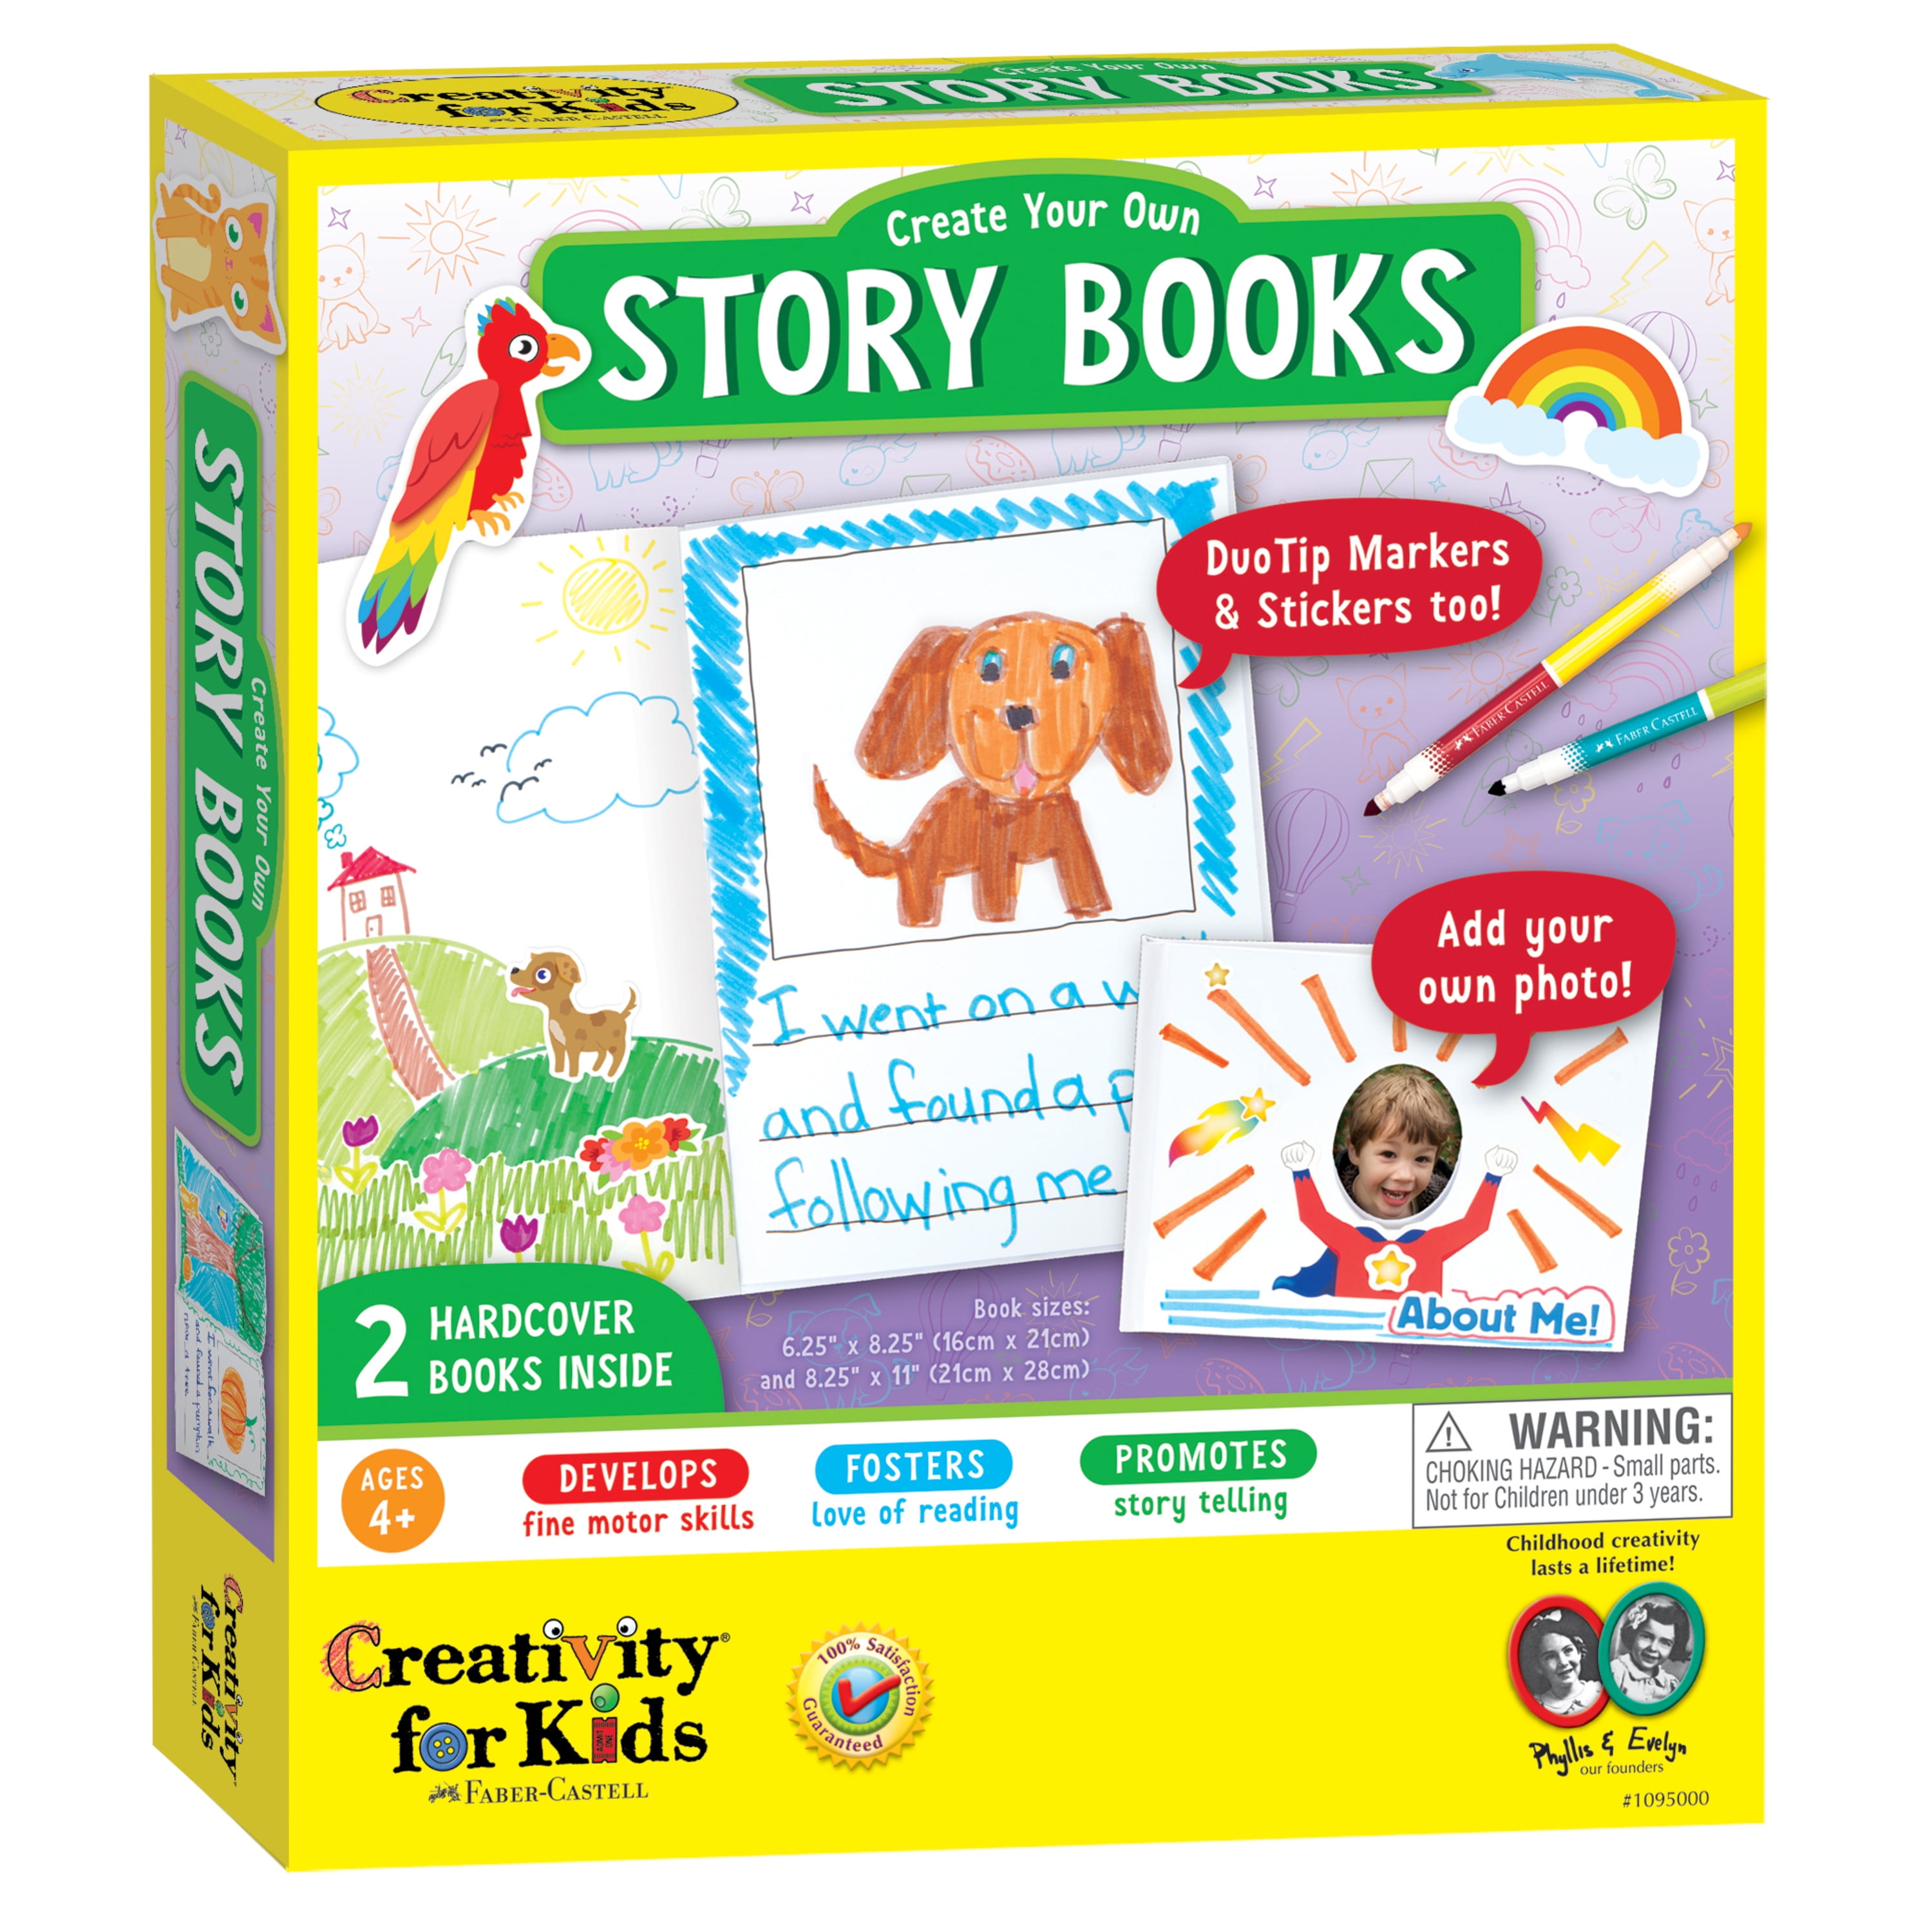 Create Your Own Storybook